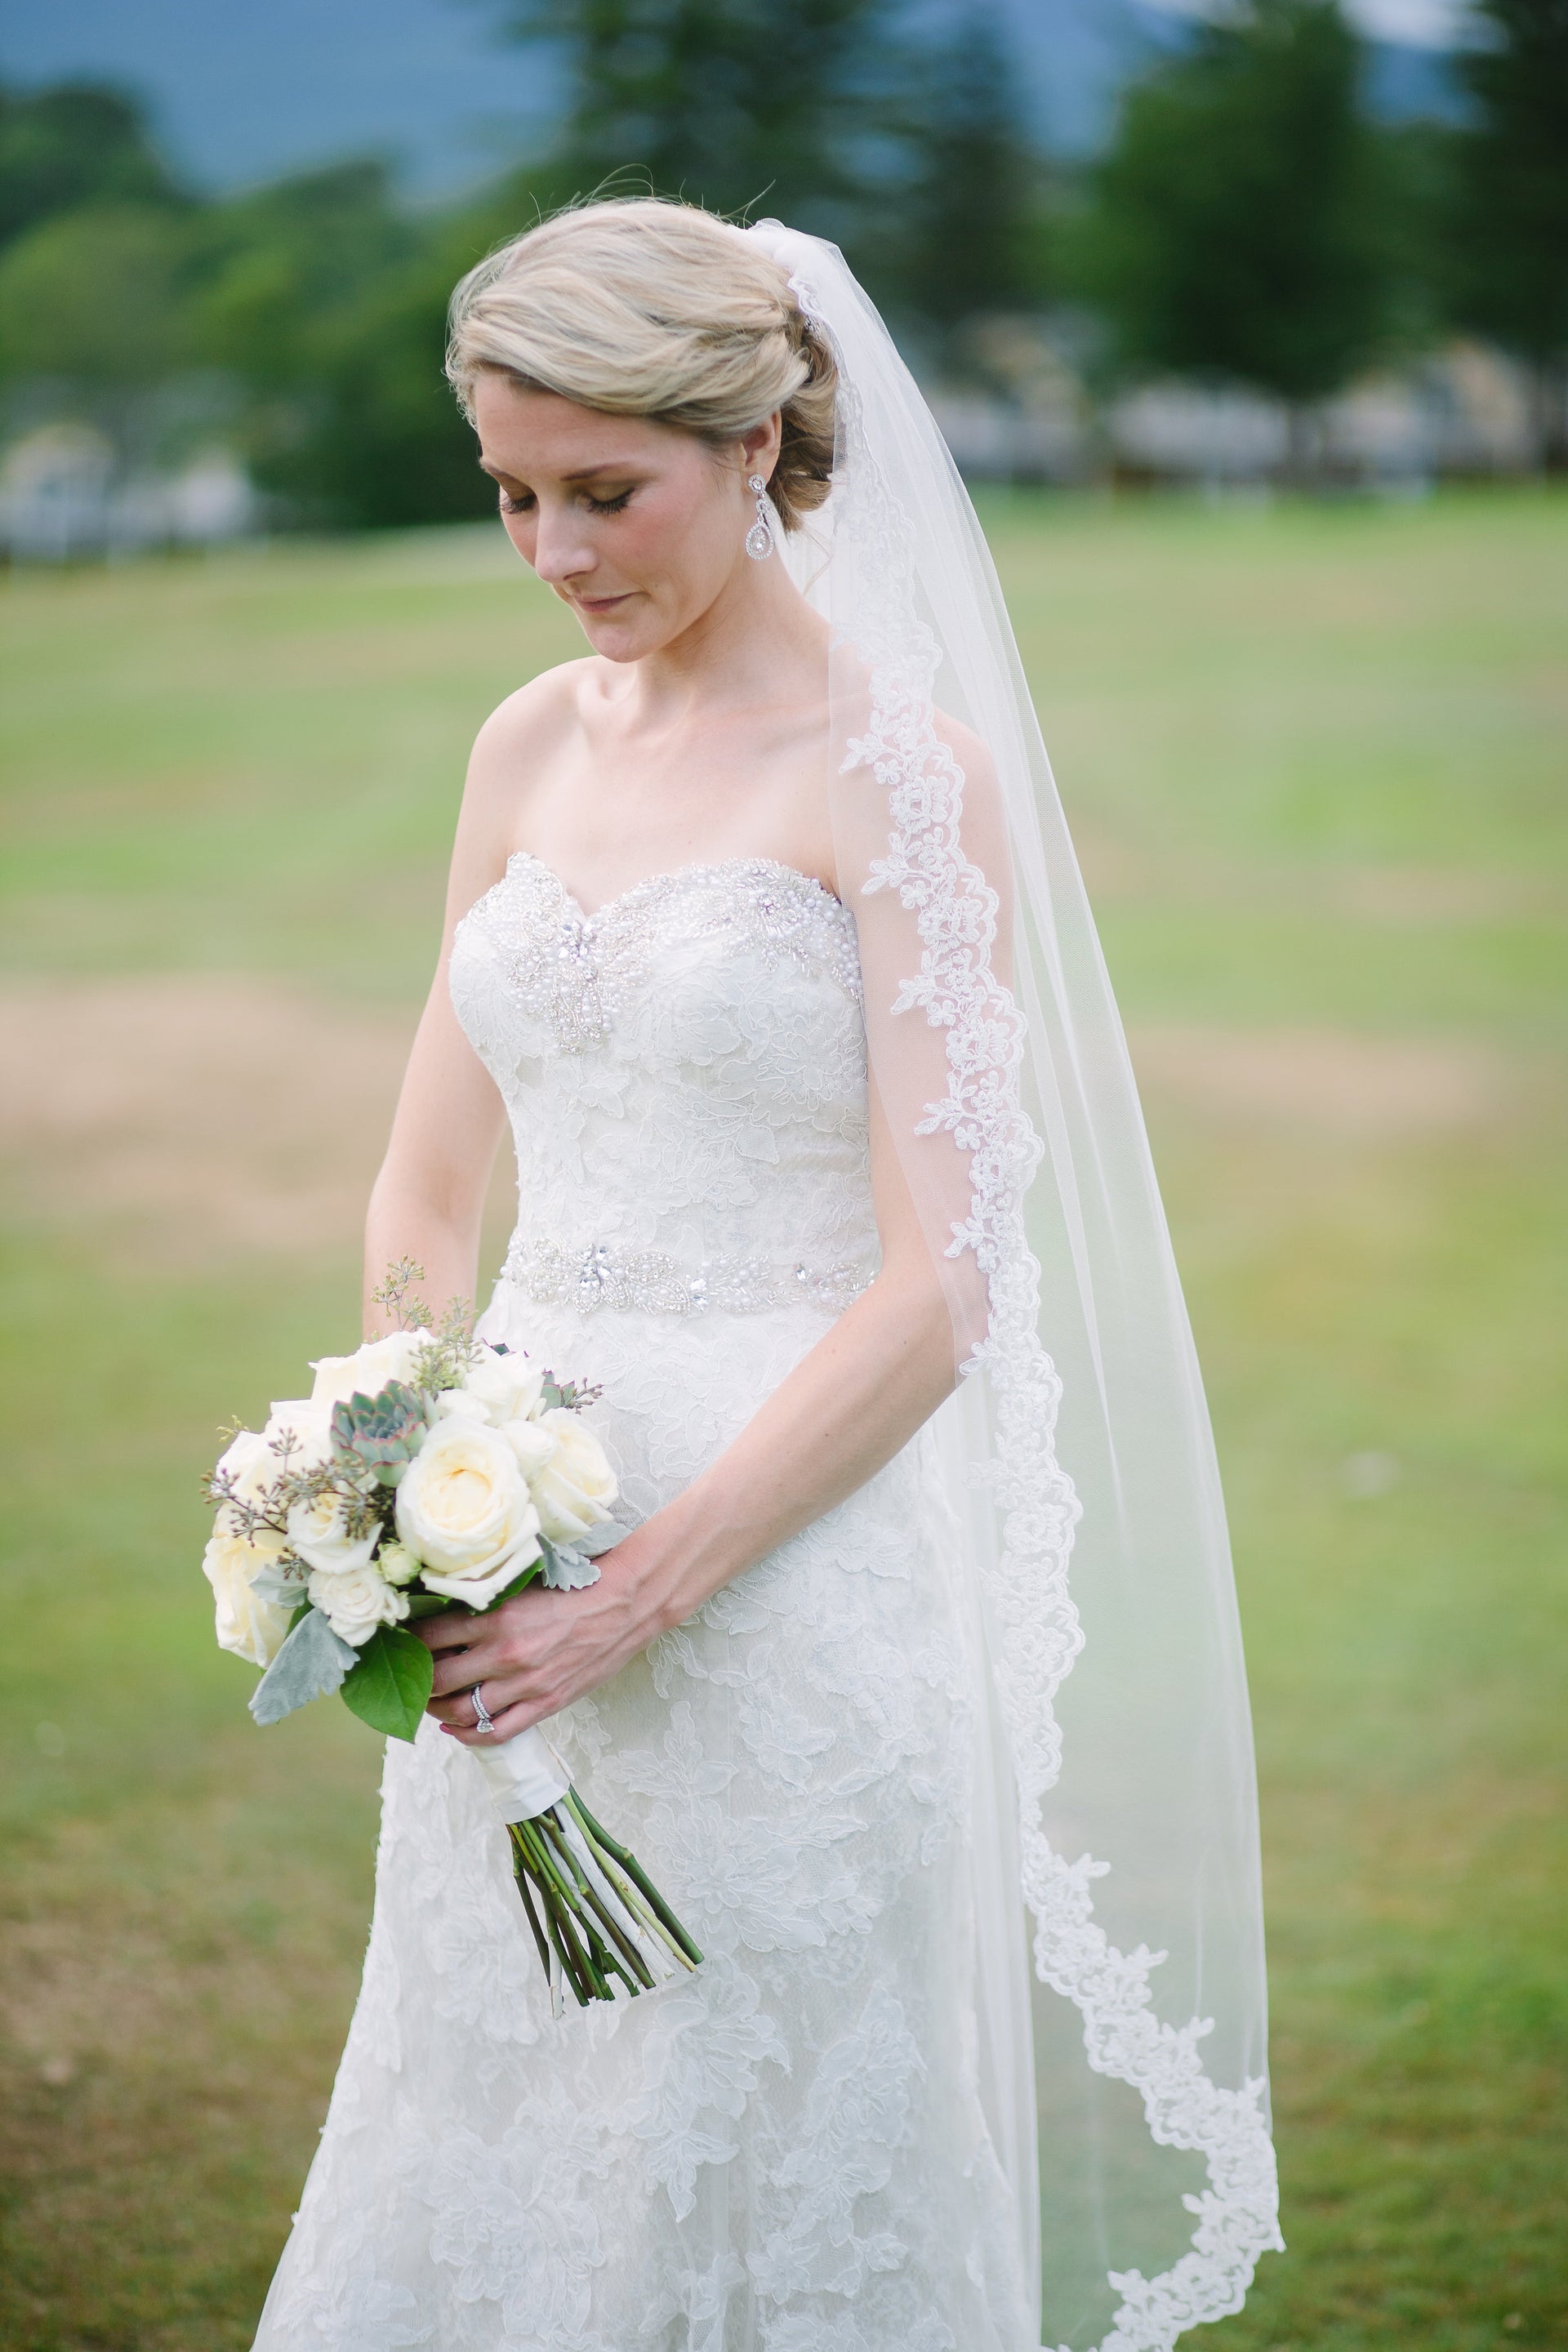 How to Save Money on Your Wedding Dress